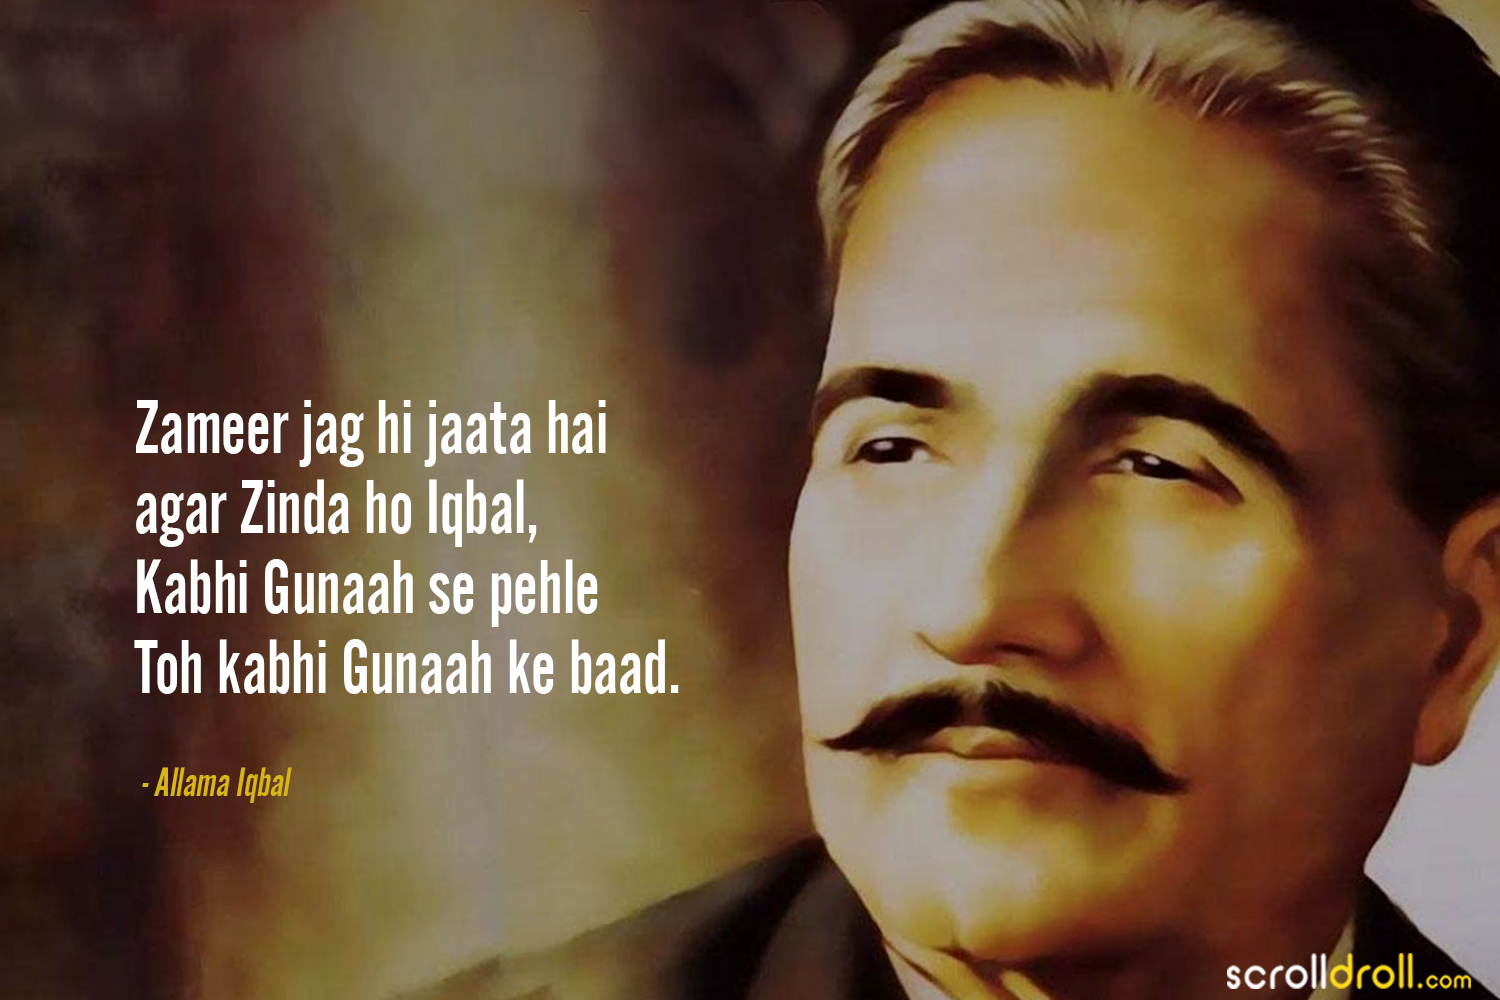 Shayaris-By-Allama-Iqbal-16 - The Best of Indian Pop Culture ...